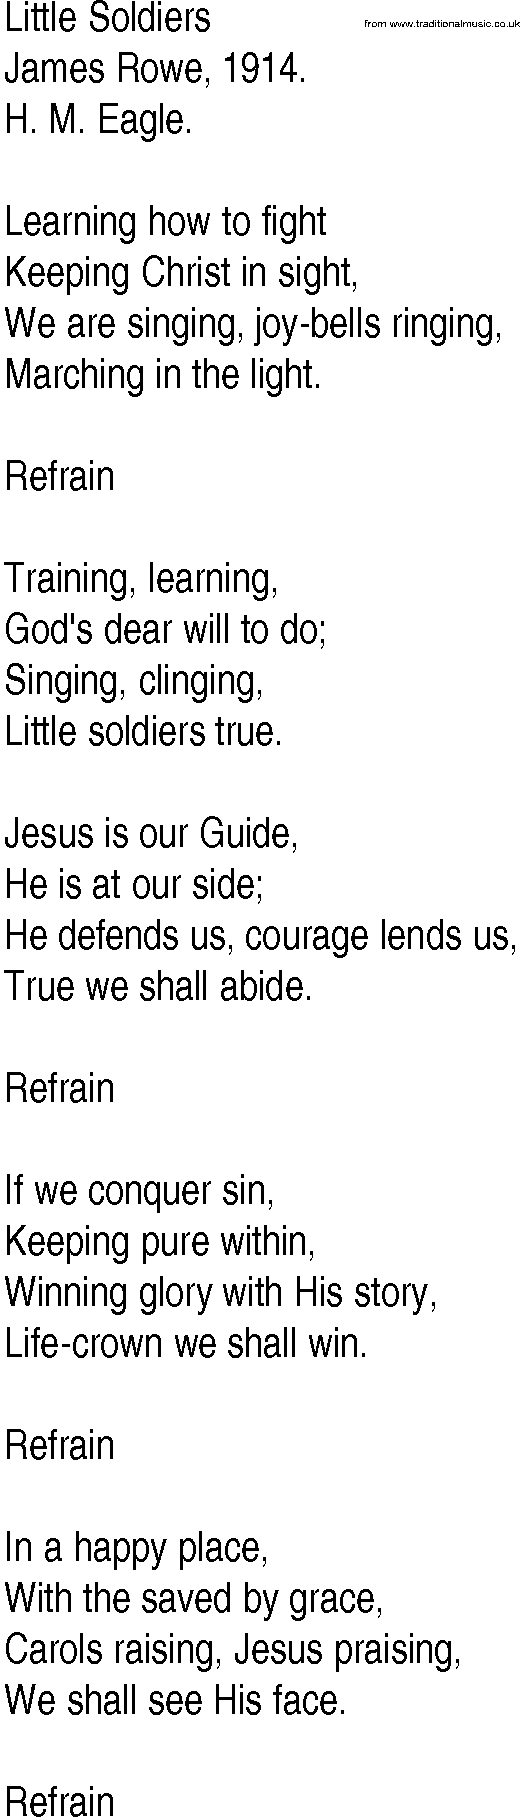 Hymn and Gospel Song: Little Soldiers by James Rowe lyrics